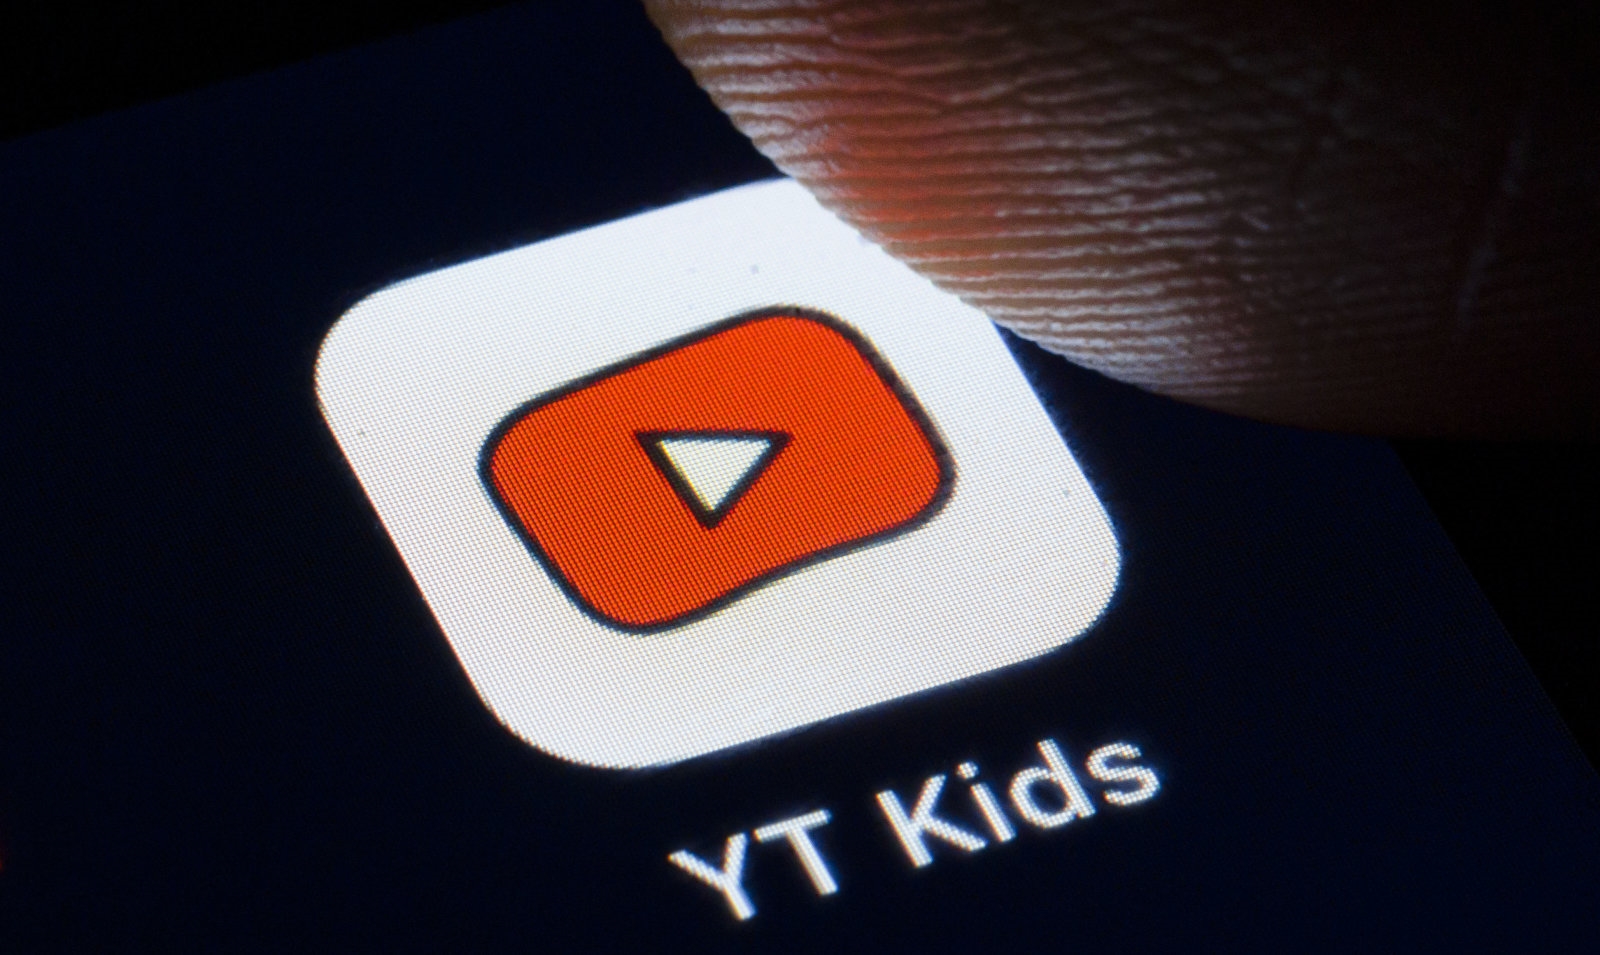 YouTube Kids Videos: Nurturing Minds and Entertainment for Young Viewers